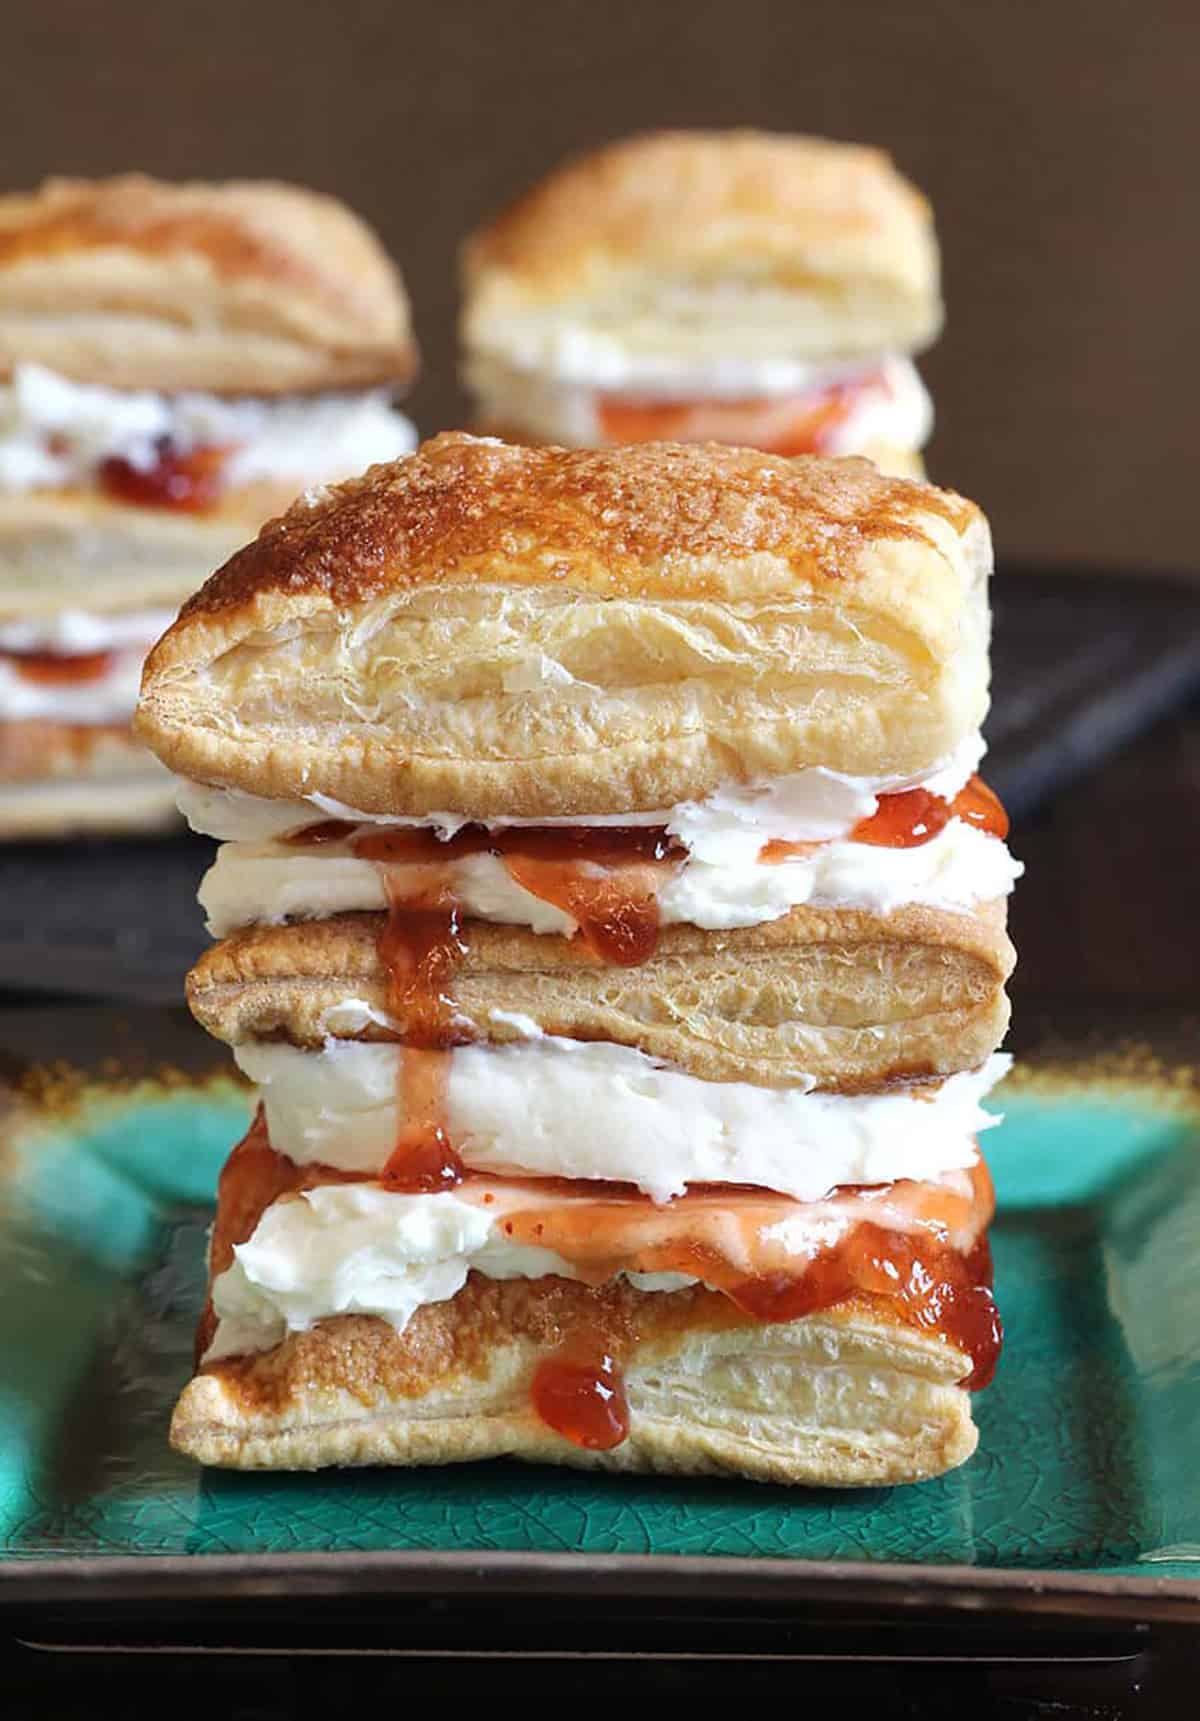 Best French and Italian Puff Pastry Dessert - Napoleon (Mille Feuille)